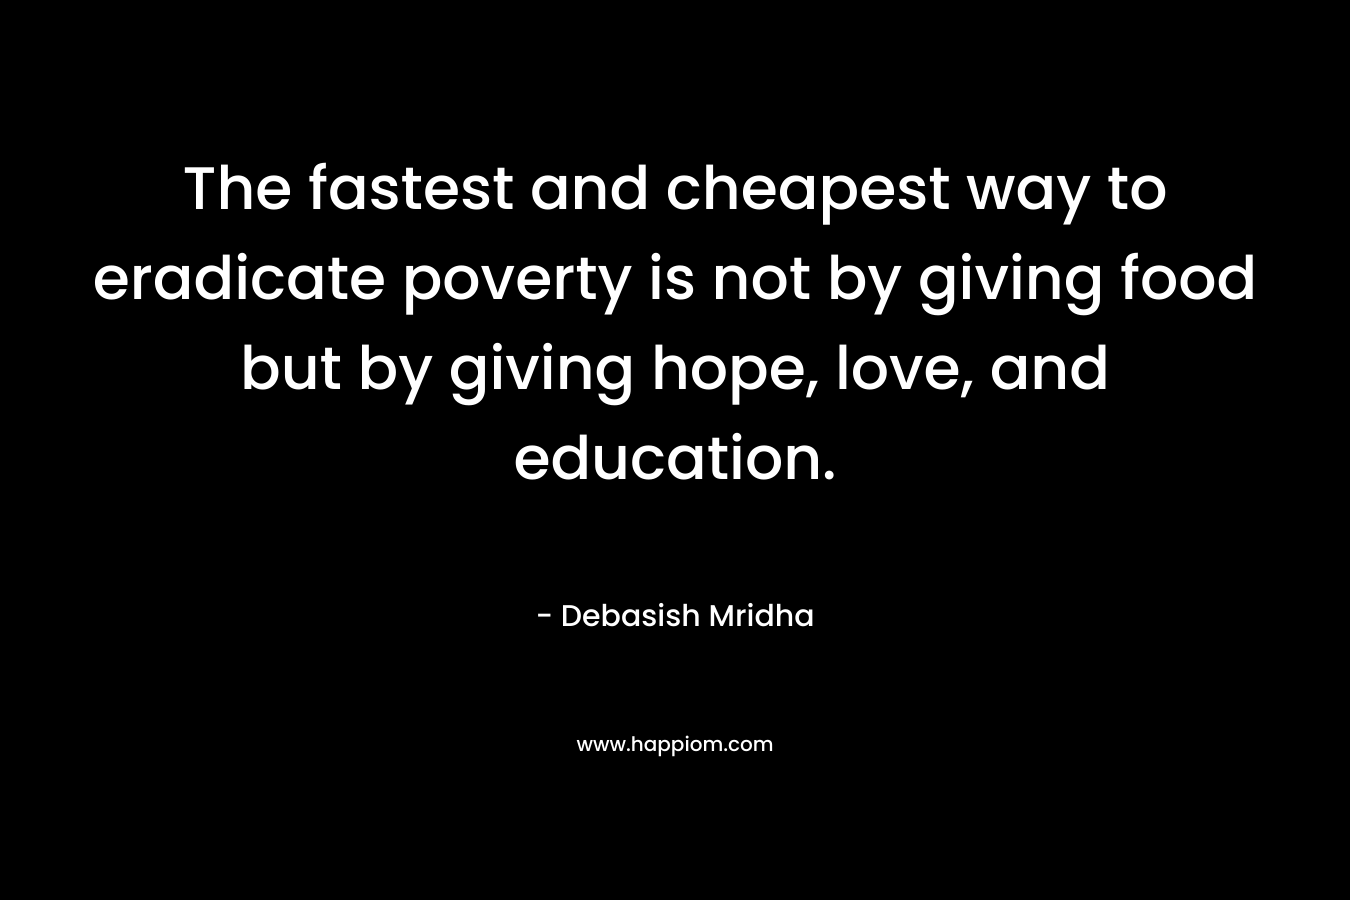 The fastest and cheapest way to eradicate poverty is not by giving food but by giving hope, love, and education. – Debasish Mridha